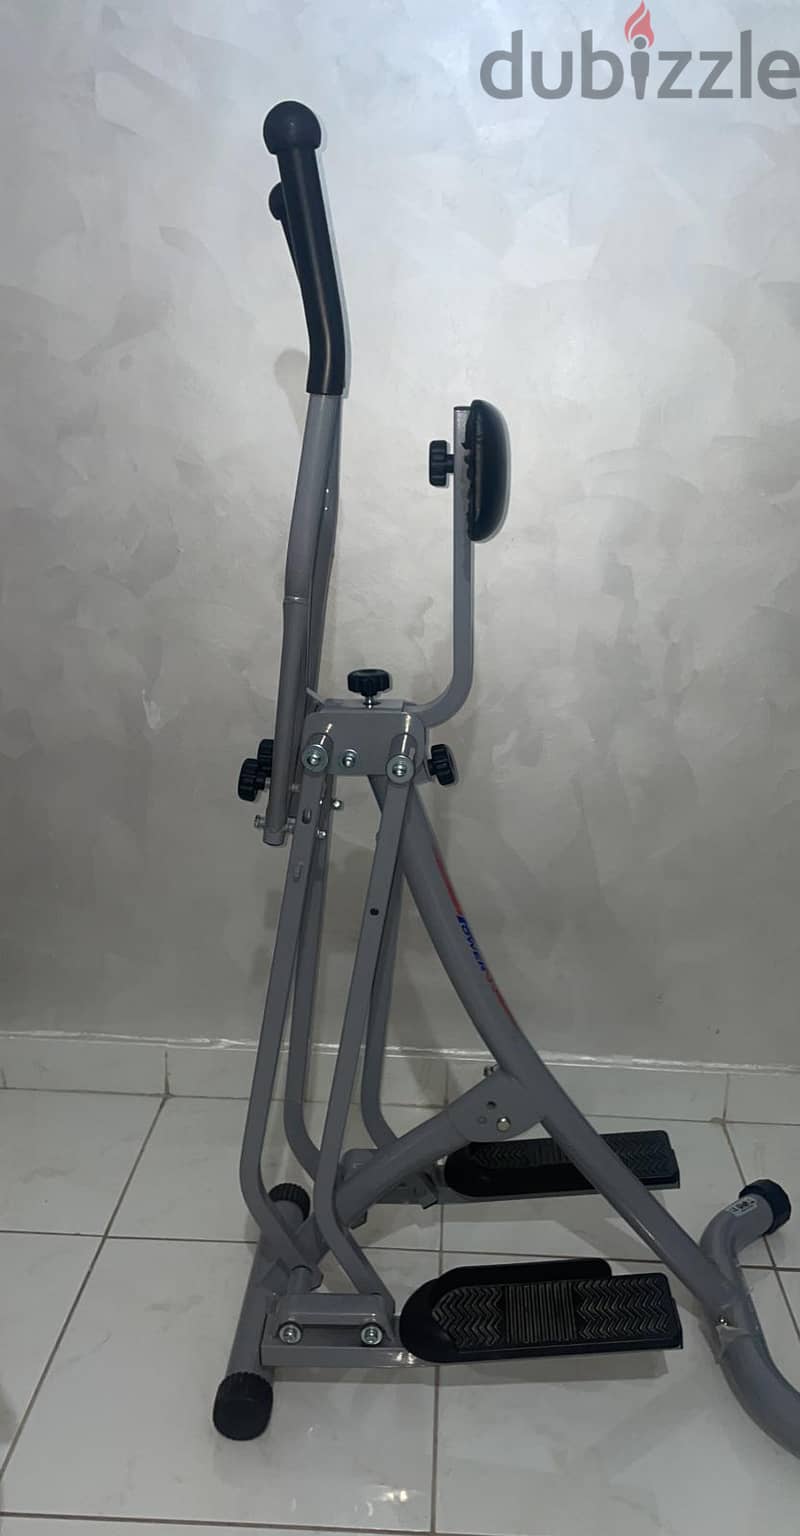 Brand new treadmill and cycling machine for sale in a very discounted 2